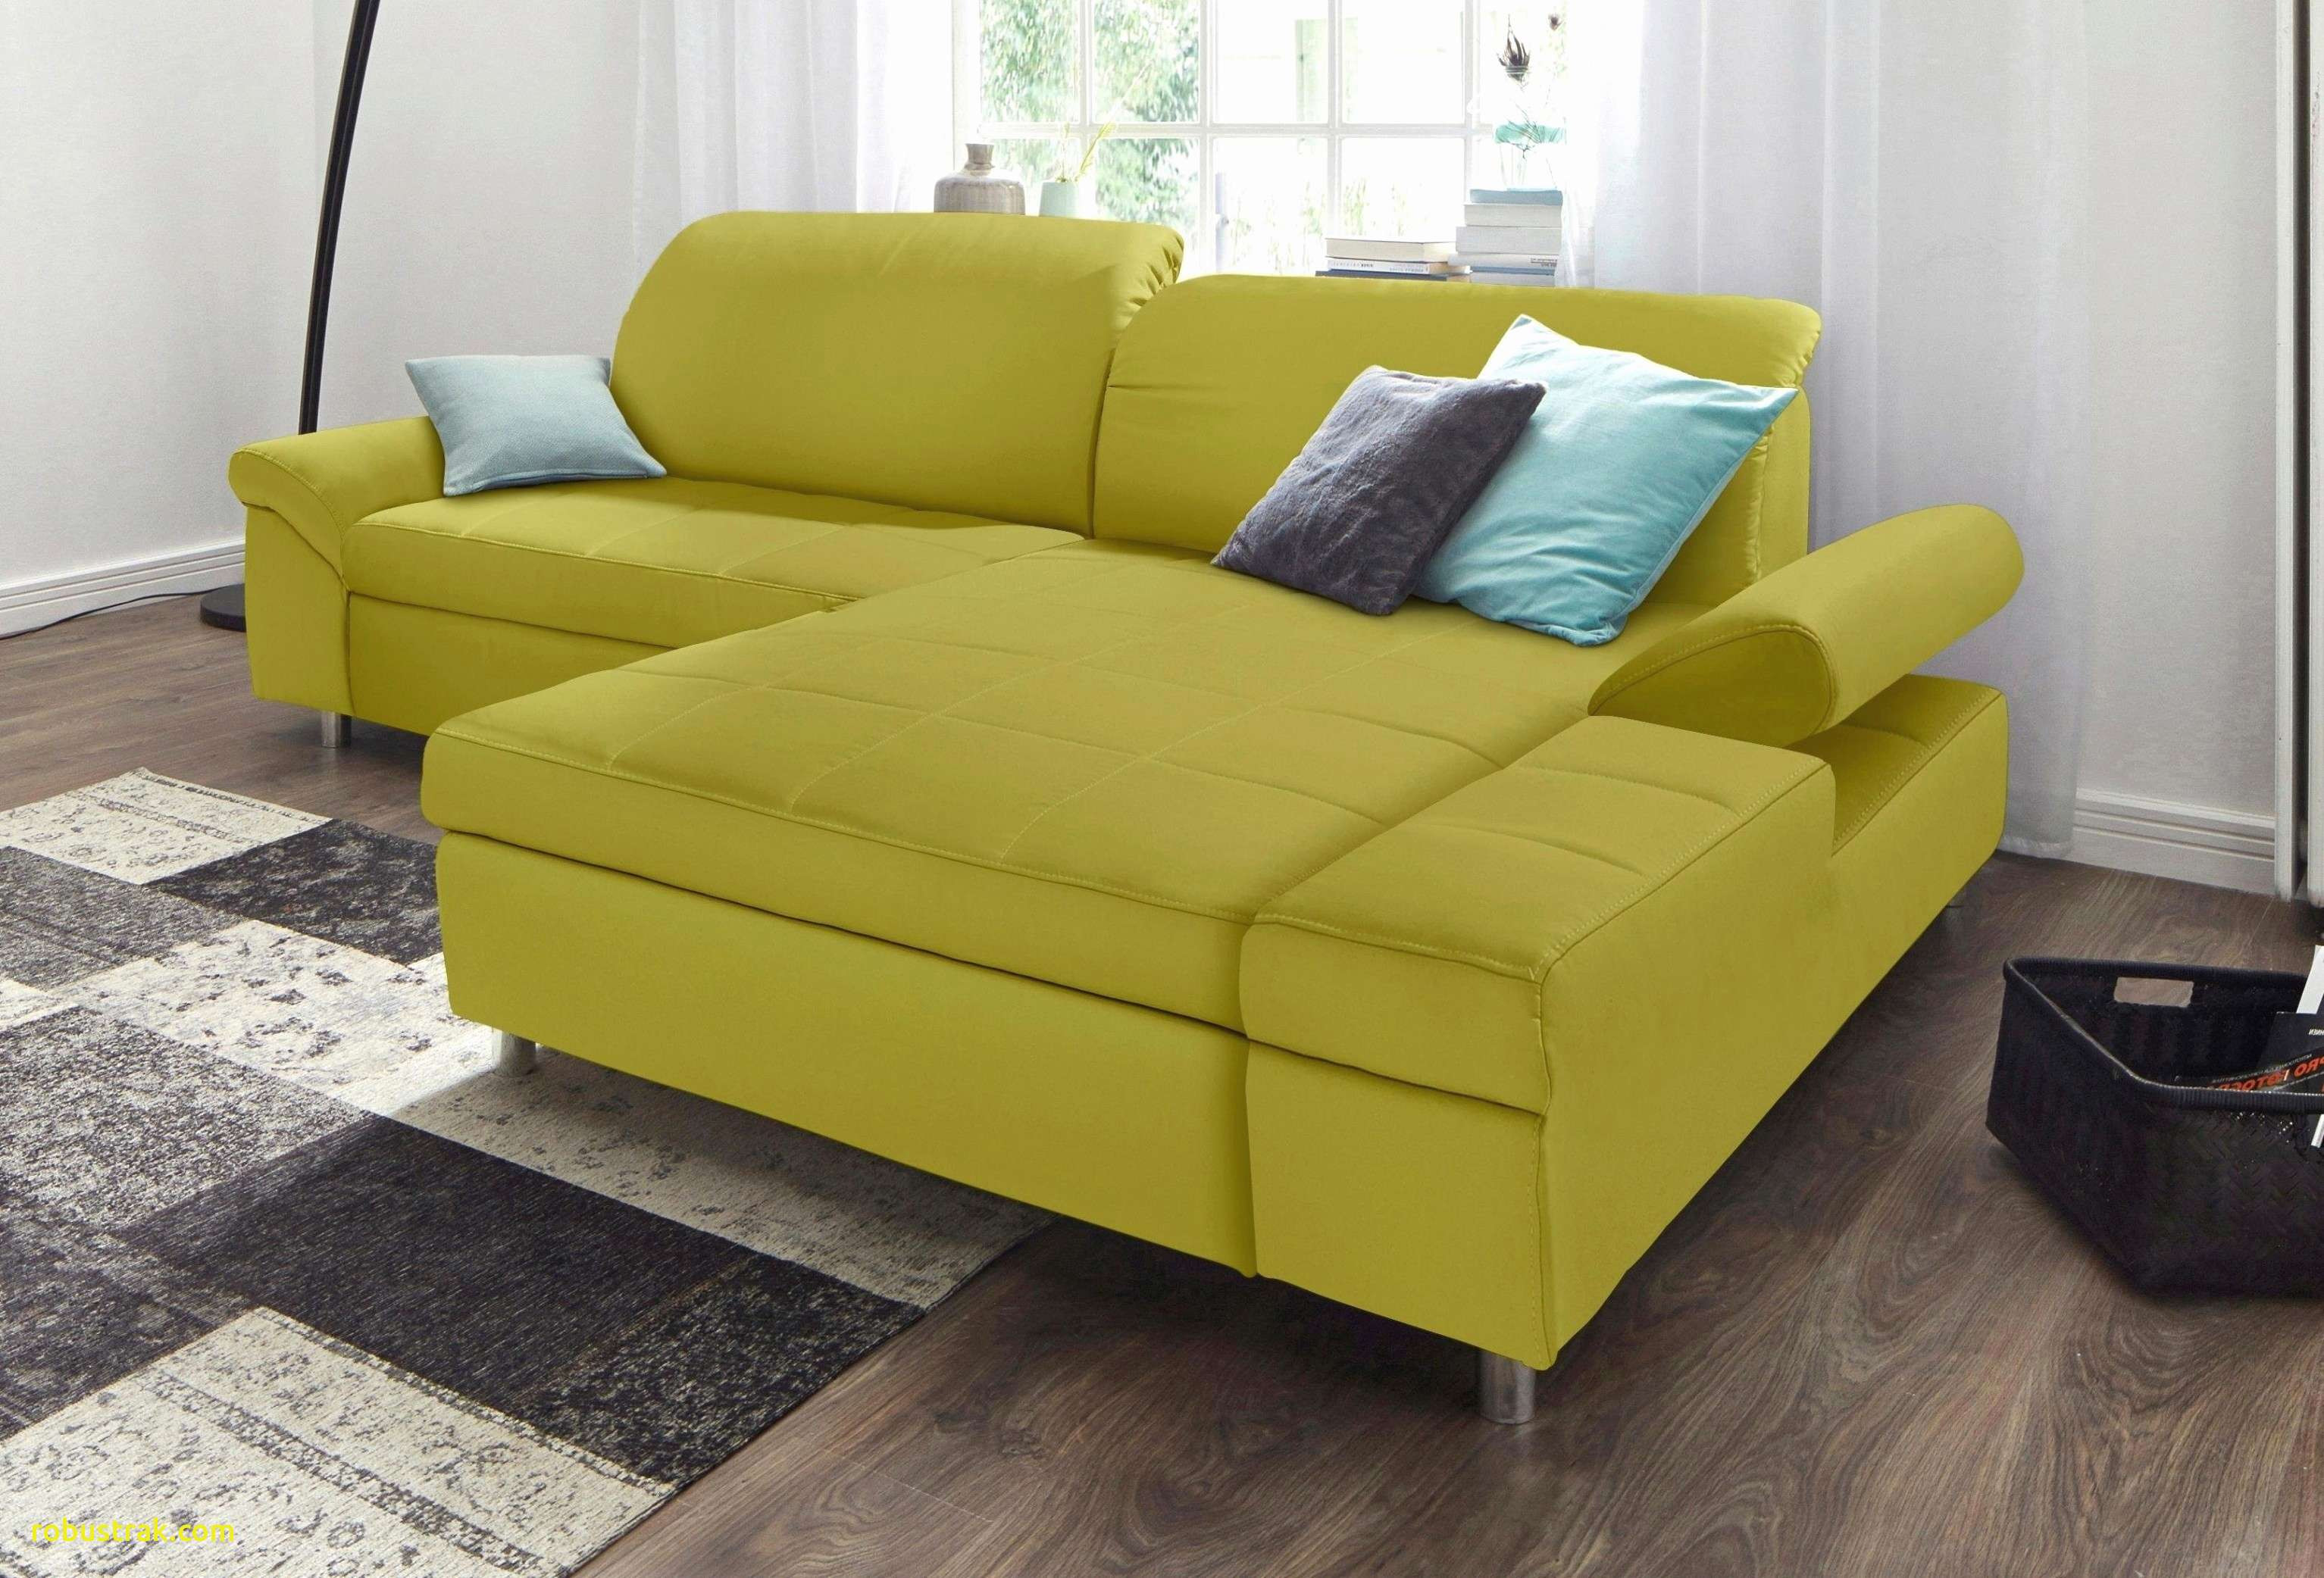 15 Unique Big Round Vase 2022 free download big round vase of awesome big round beds home design ideas in big sofa ikea mobel yellow living room lounge chair fresh palettenmobel lounge 0d